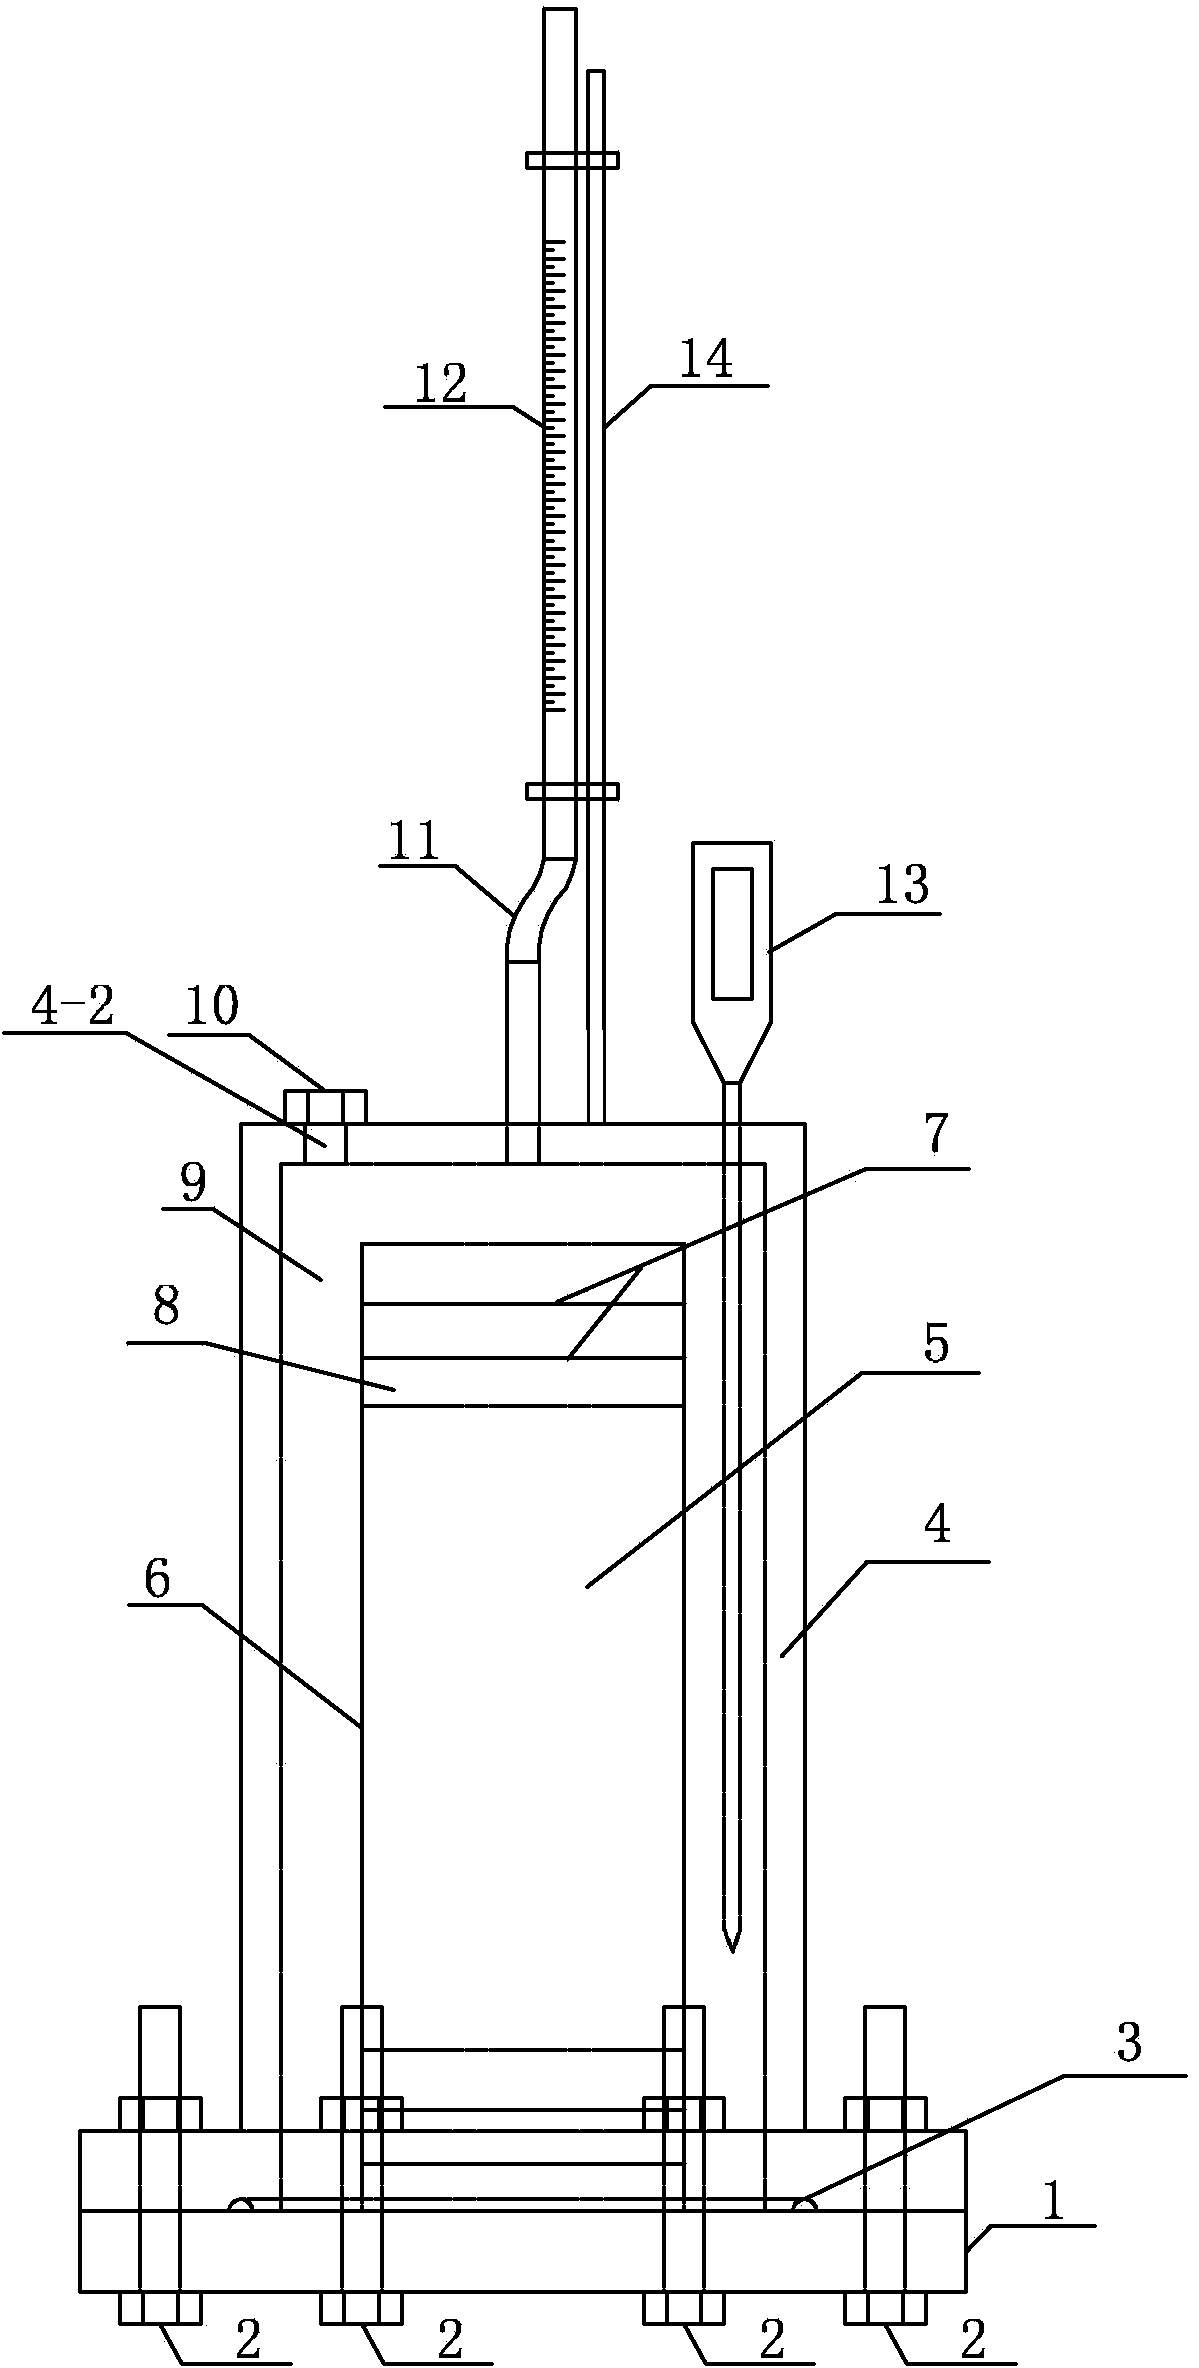 Civil engineering material volume change test instrument and test method